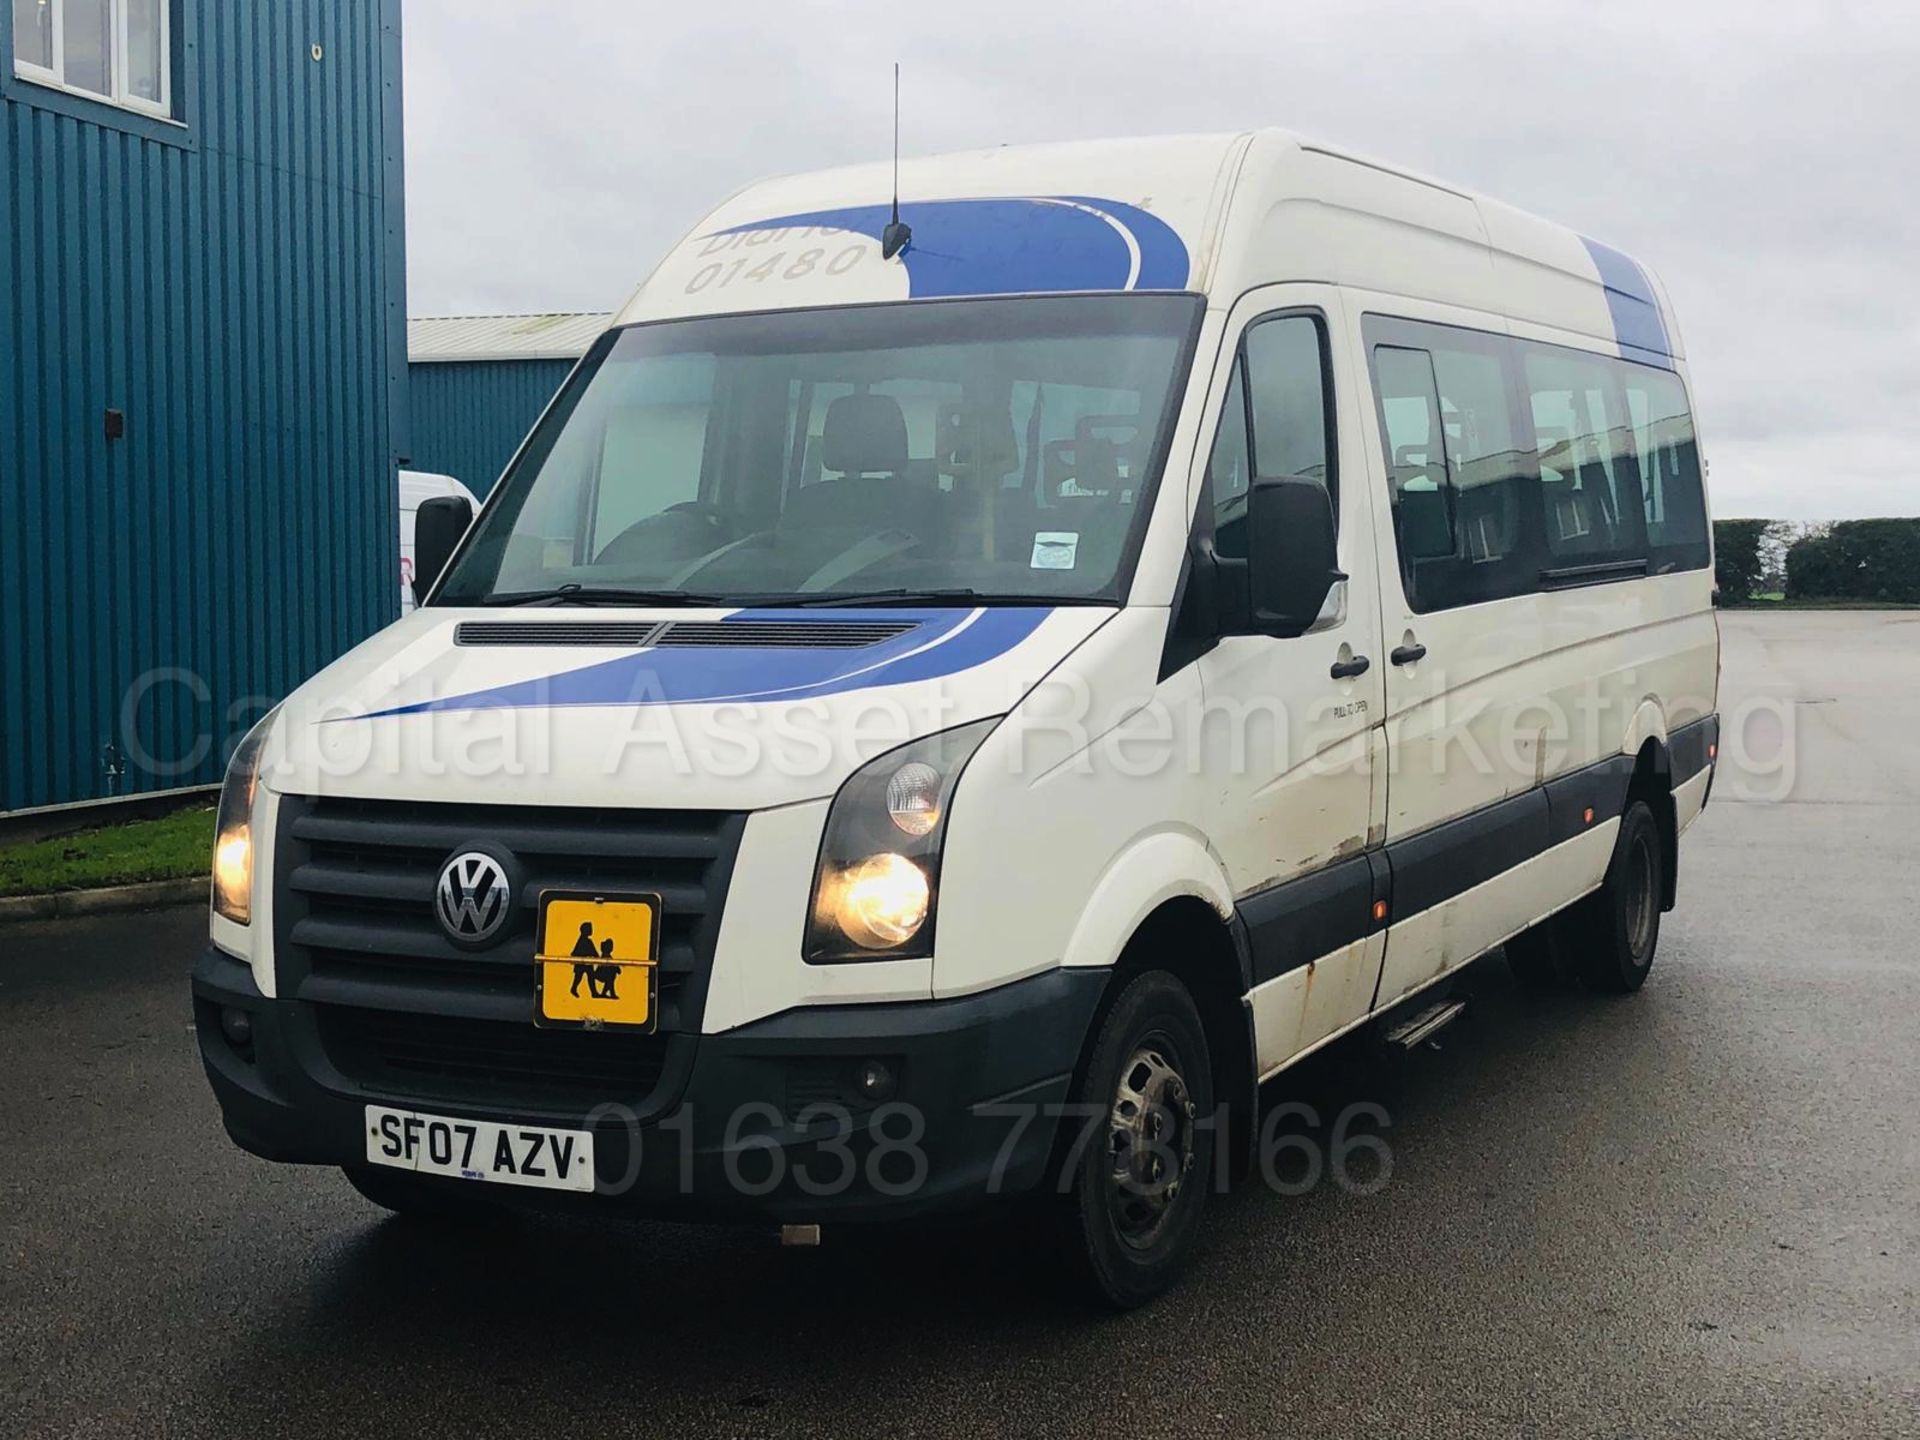 VOLKSWAGEN CRAFTER 2.5 TDI *LWB - 16 SEATER MINI-BUS / COACH* (2007) *ELECTRIC WHEEL CHAIR LIFT* - Image 2 of 30